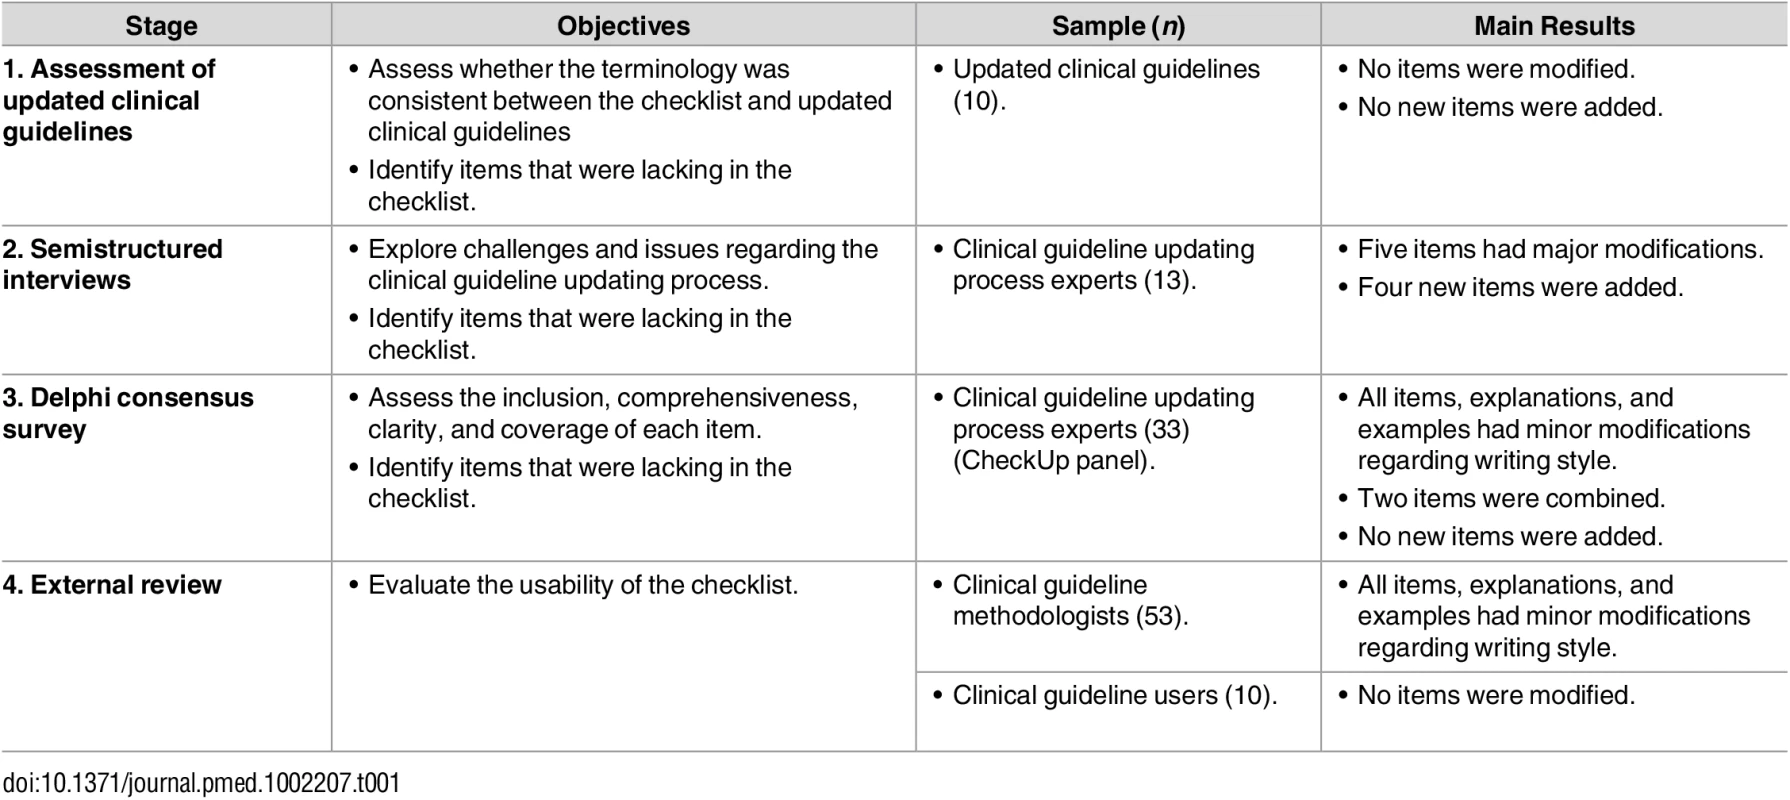 CheckUp: Stages of the optimisation process (objective, sample, and results by optimisation processes).